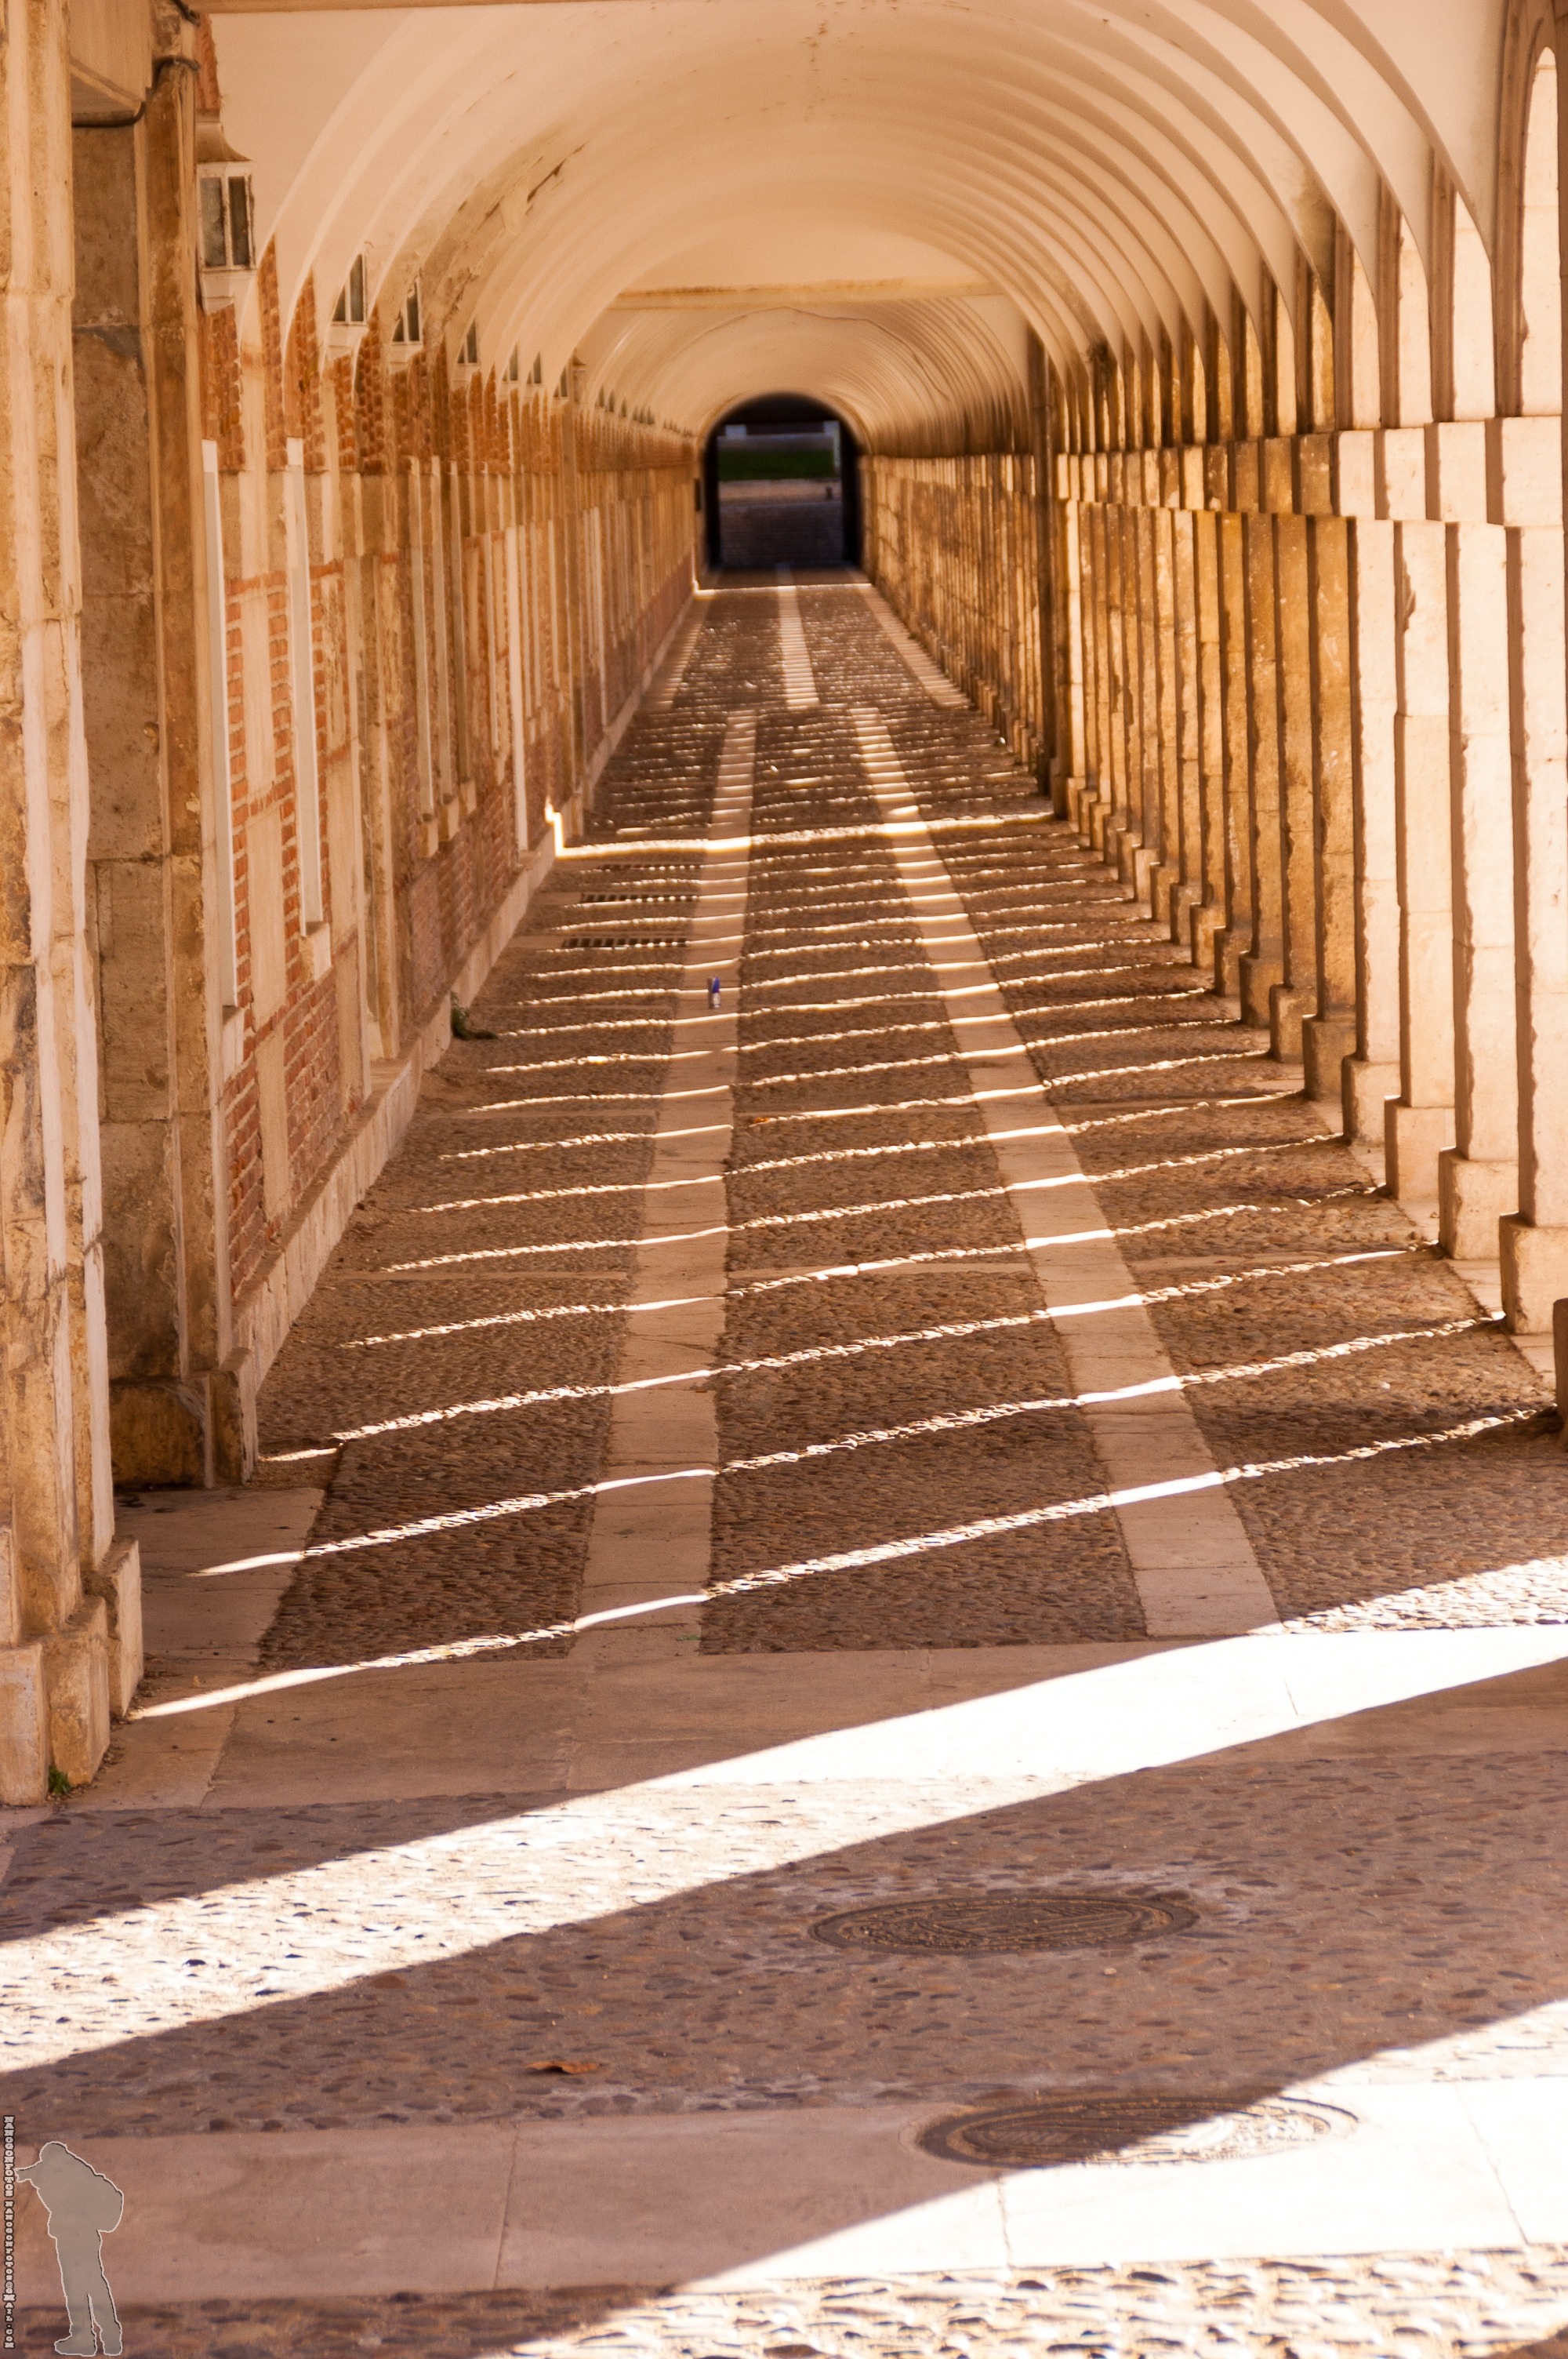 Long corridor with columns free image download